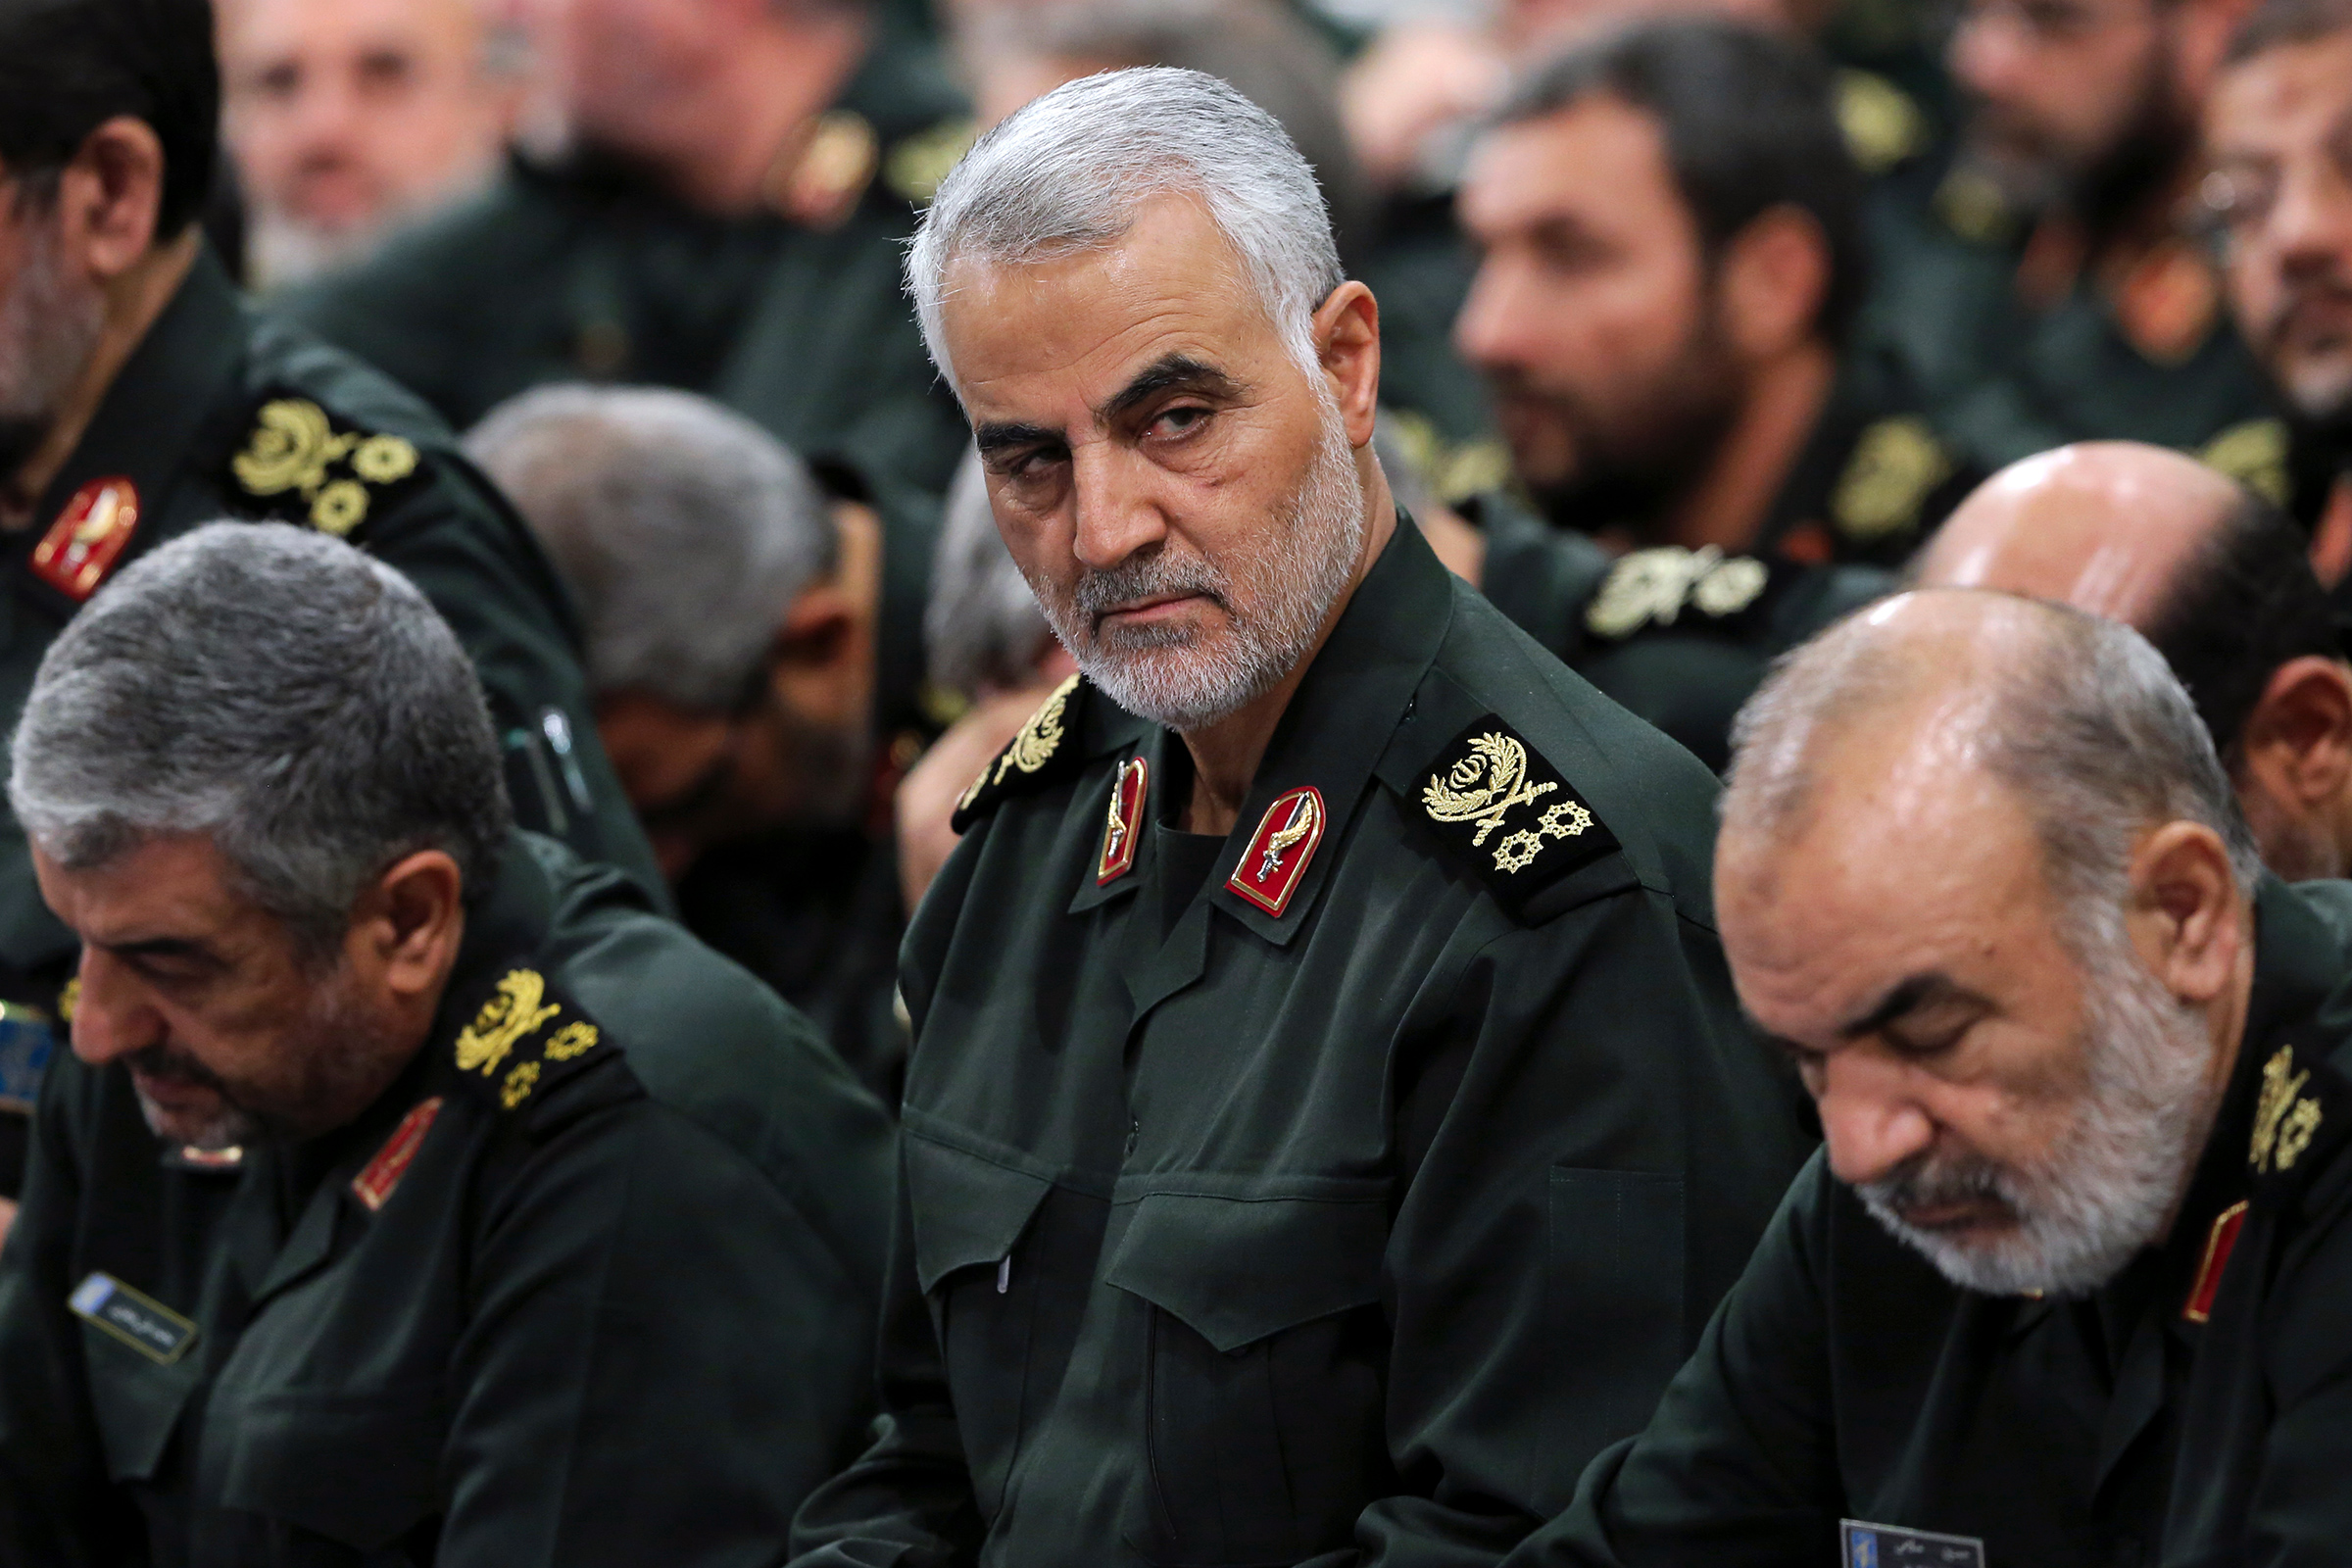 Gen. Qasem Soleimani, center, attends a meeting with Supreme Leader Ayatollah Ali Khamenei and Revolutionary Guard commanders in Tehran in September 2016. (Office of the Iranian Supreme Leader/AP)